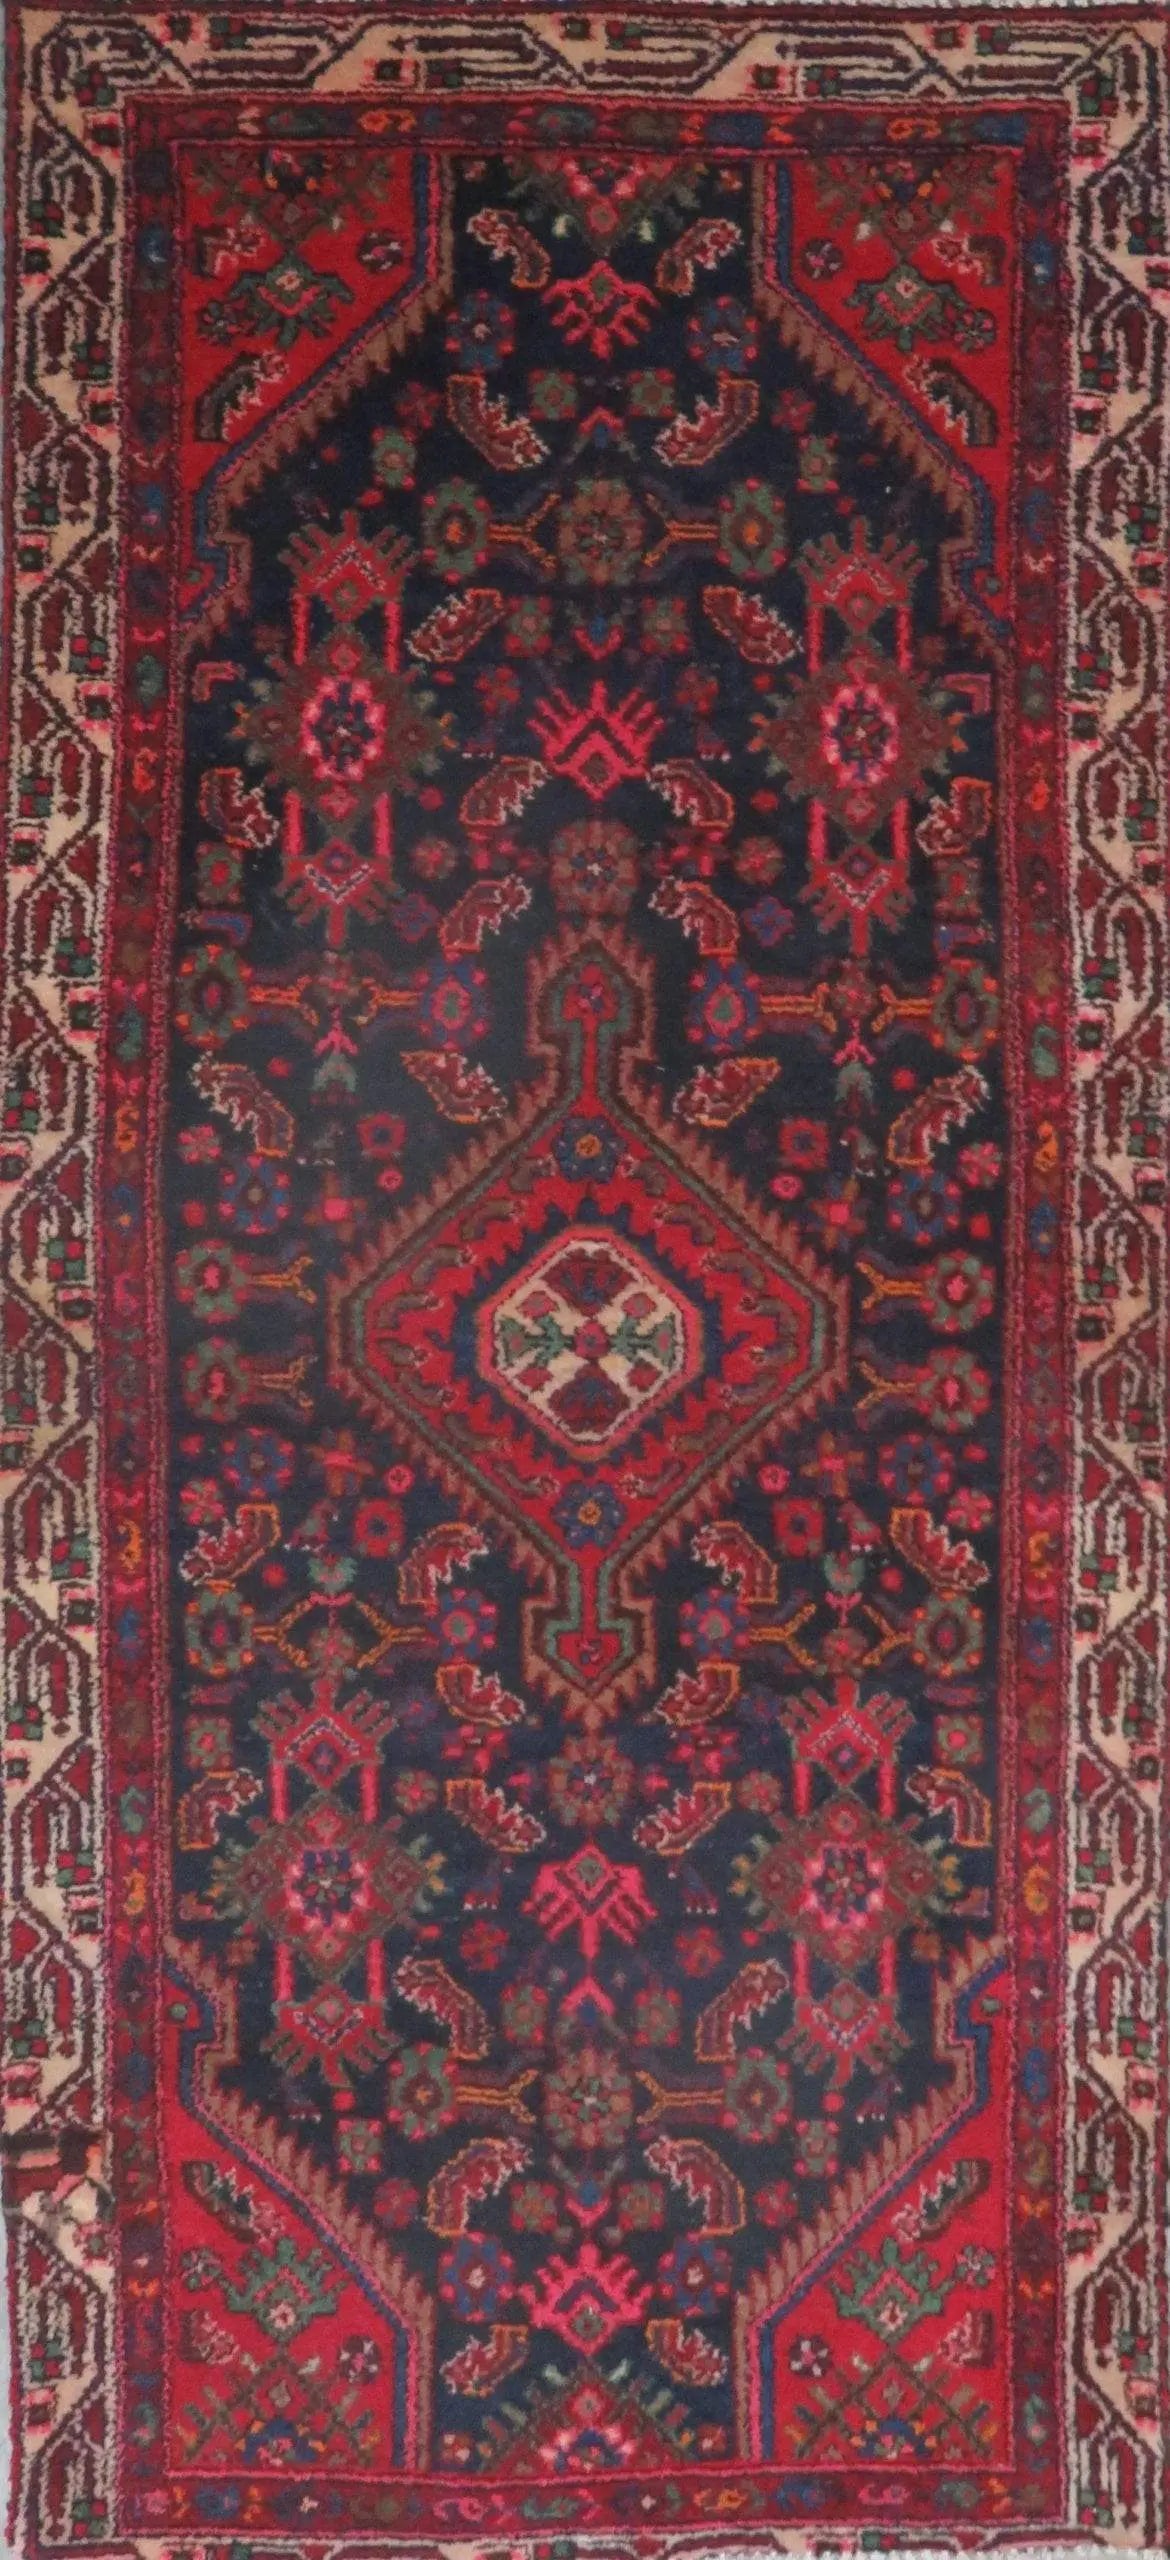 Hand-Knotted Persian Wool Rug _ Luxurious Vintage Design, 6'1" x 2'10", Artisan Crafted